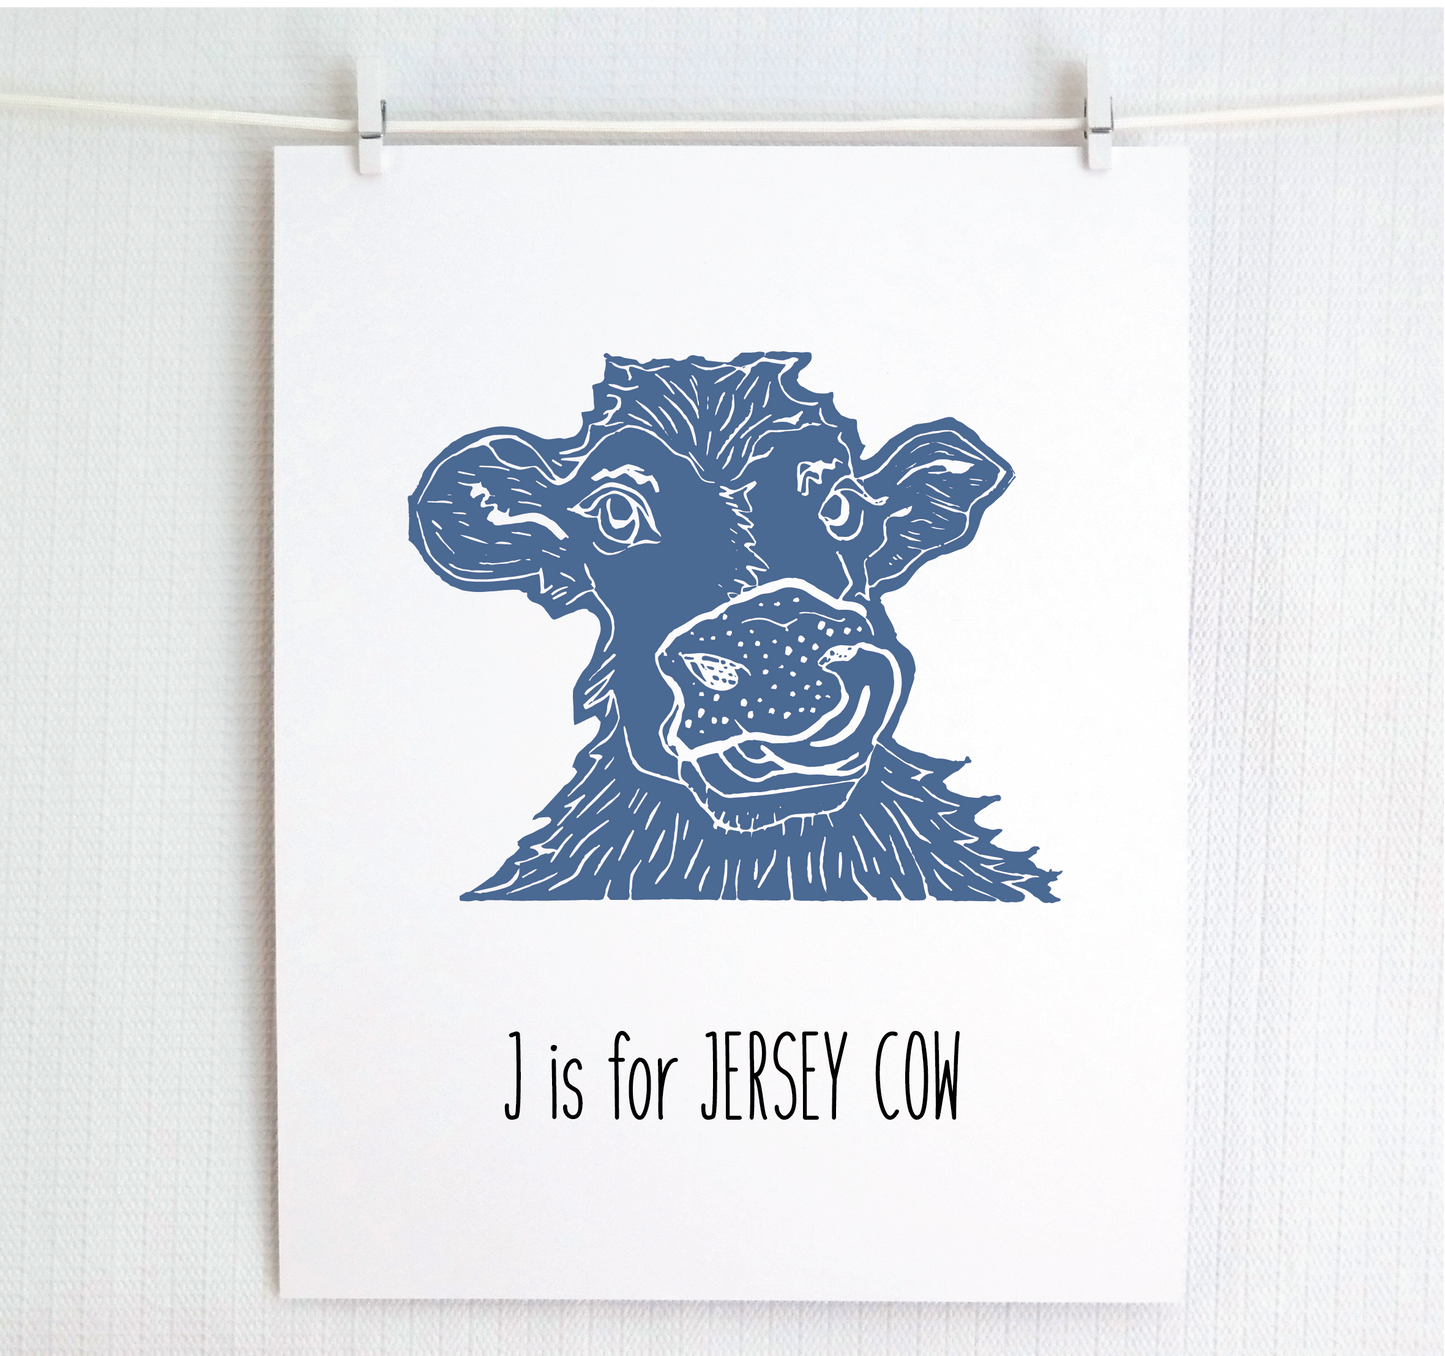 J is for Jersey Cow